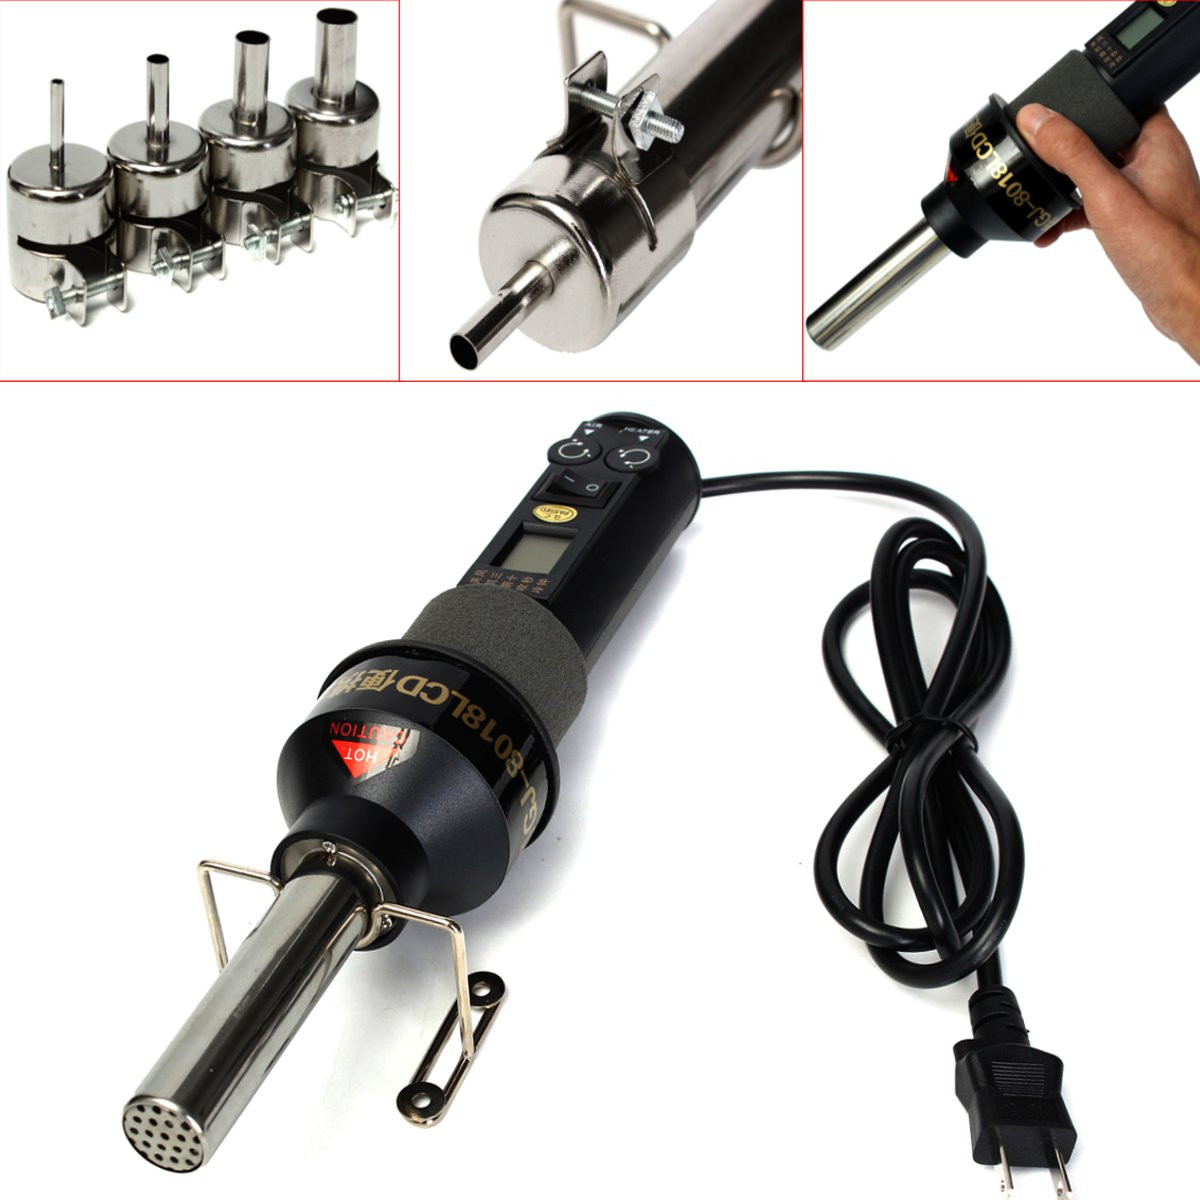 9 Nozzle Details about   200W 110V Soldering LCD Display Adjustable Electronic Heat Air Gun 